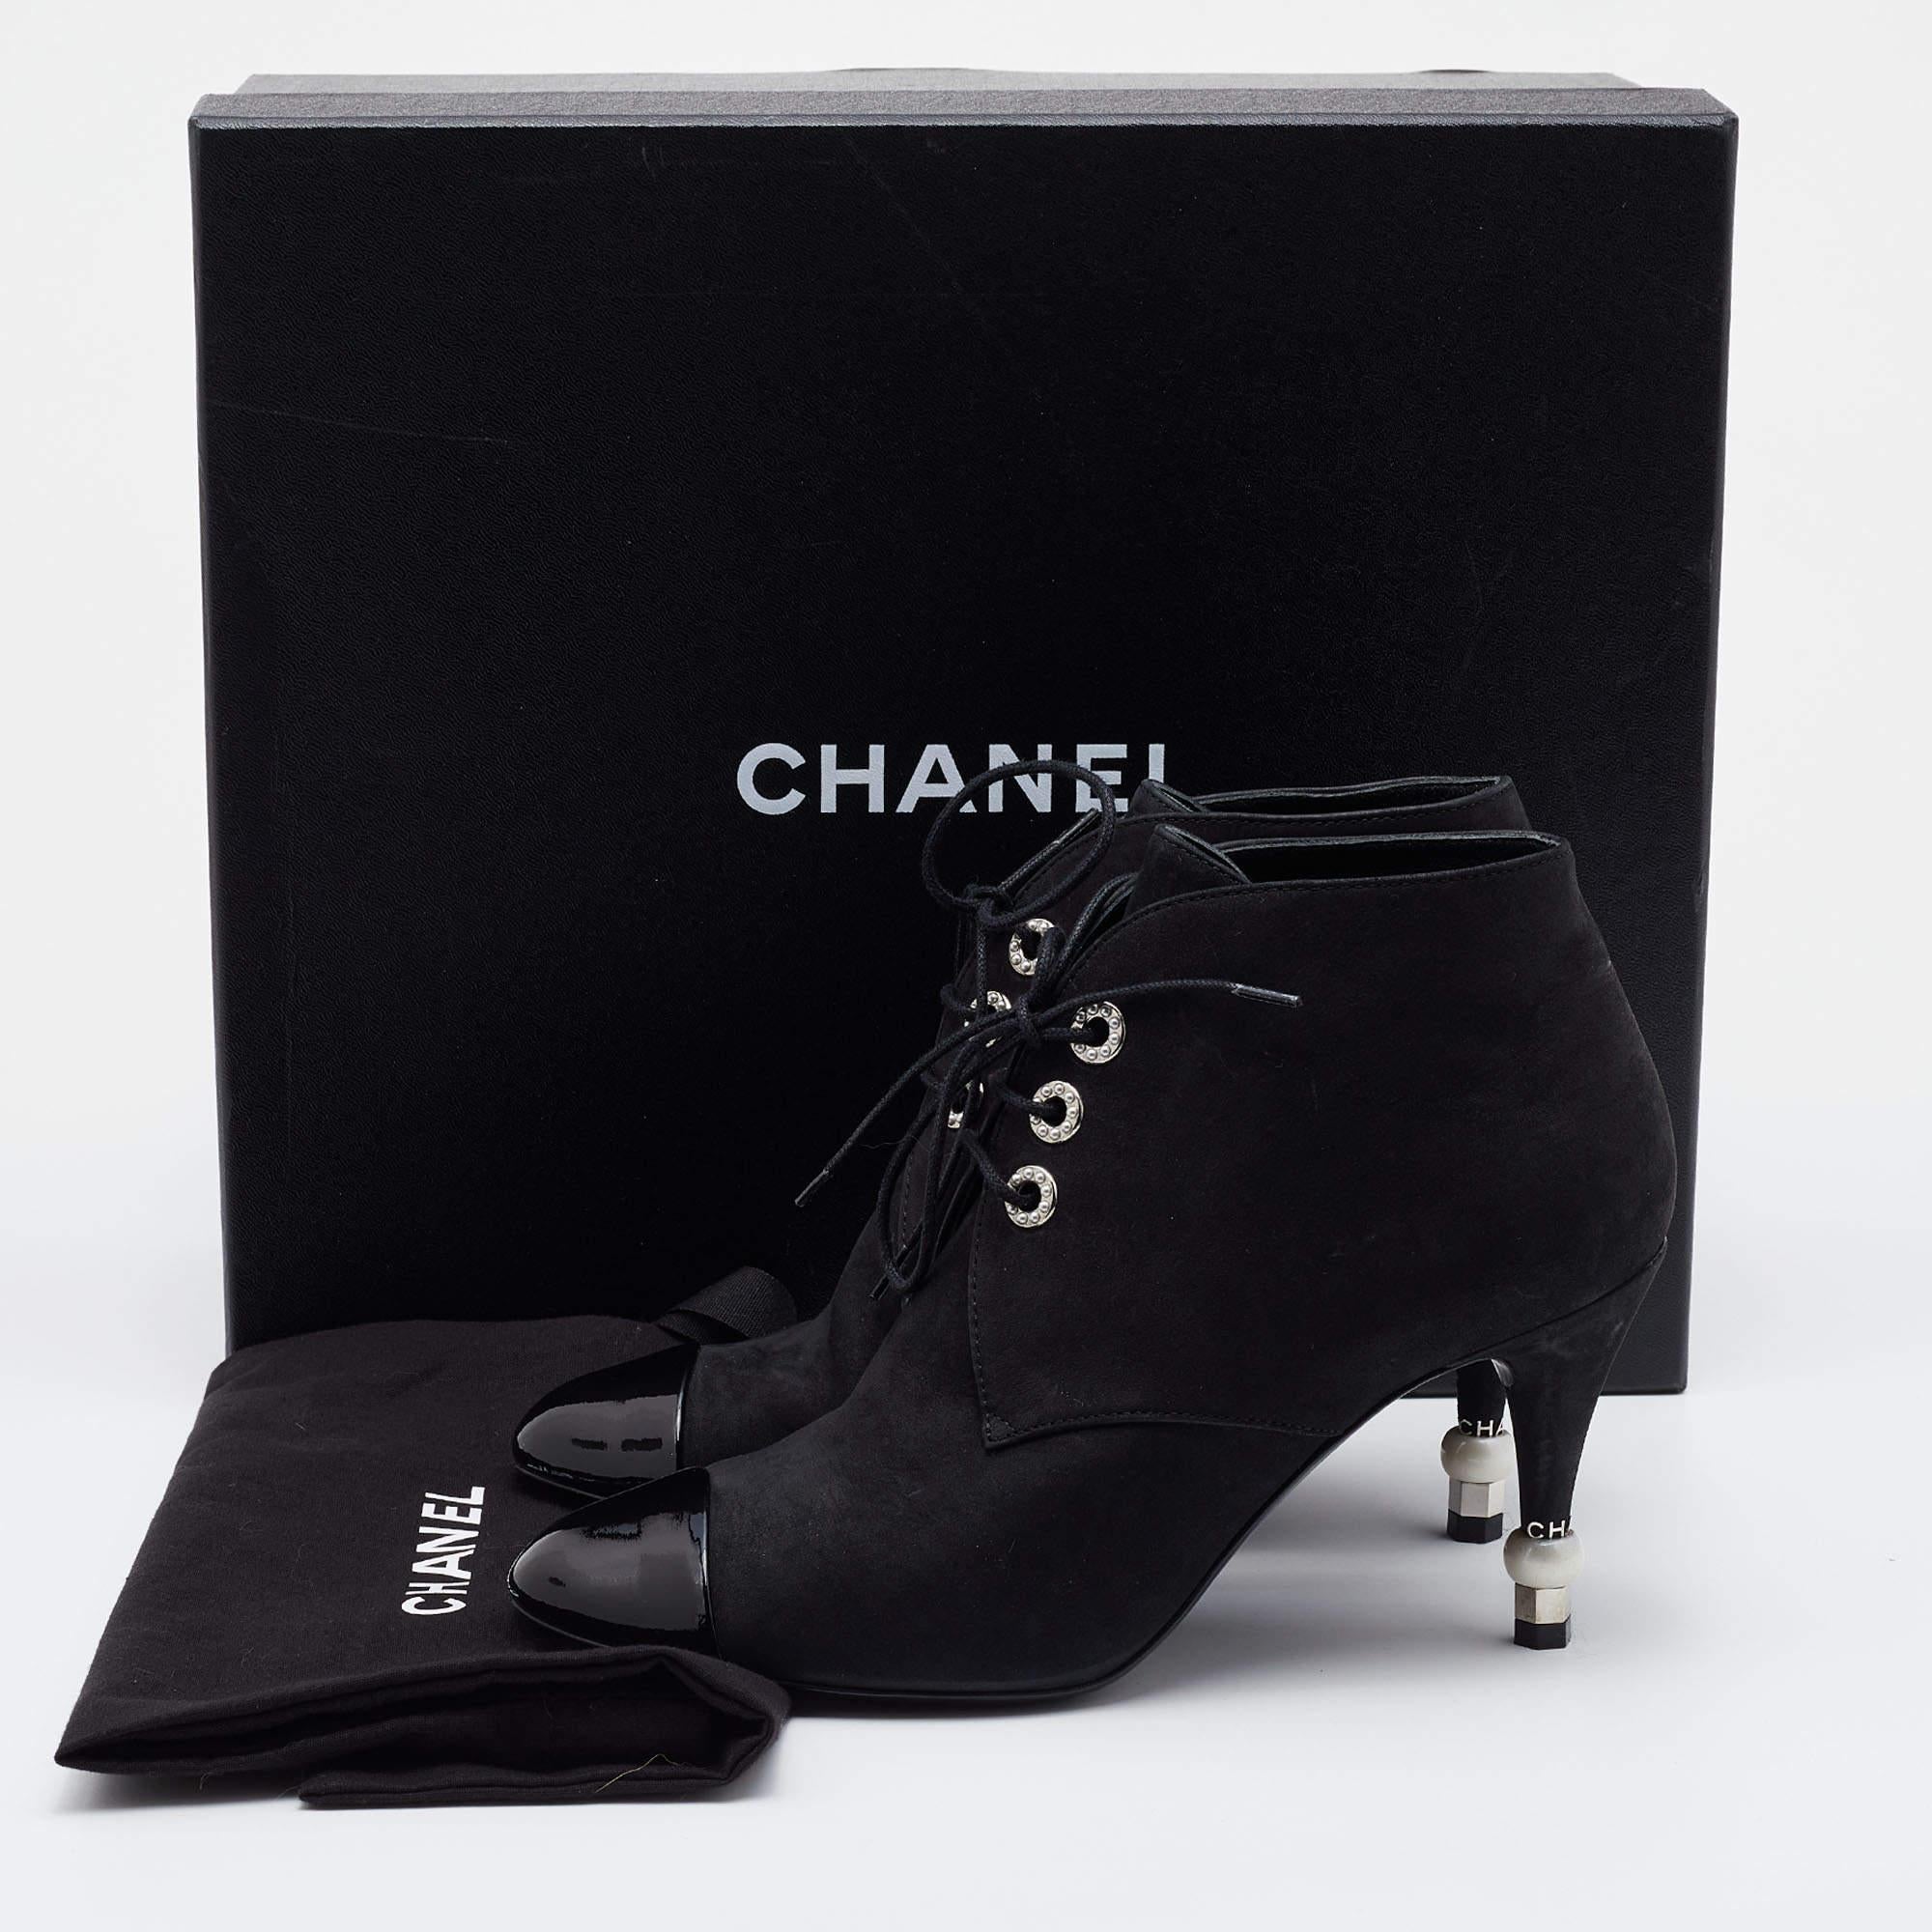 Chanel Black Nubuck and Patent Leather Cap Toe Embellished Booties Size 37 2